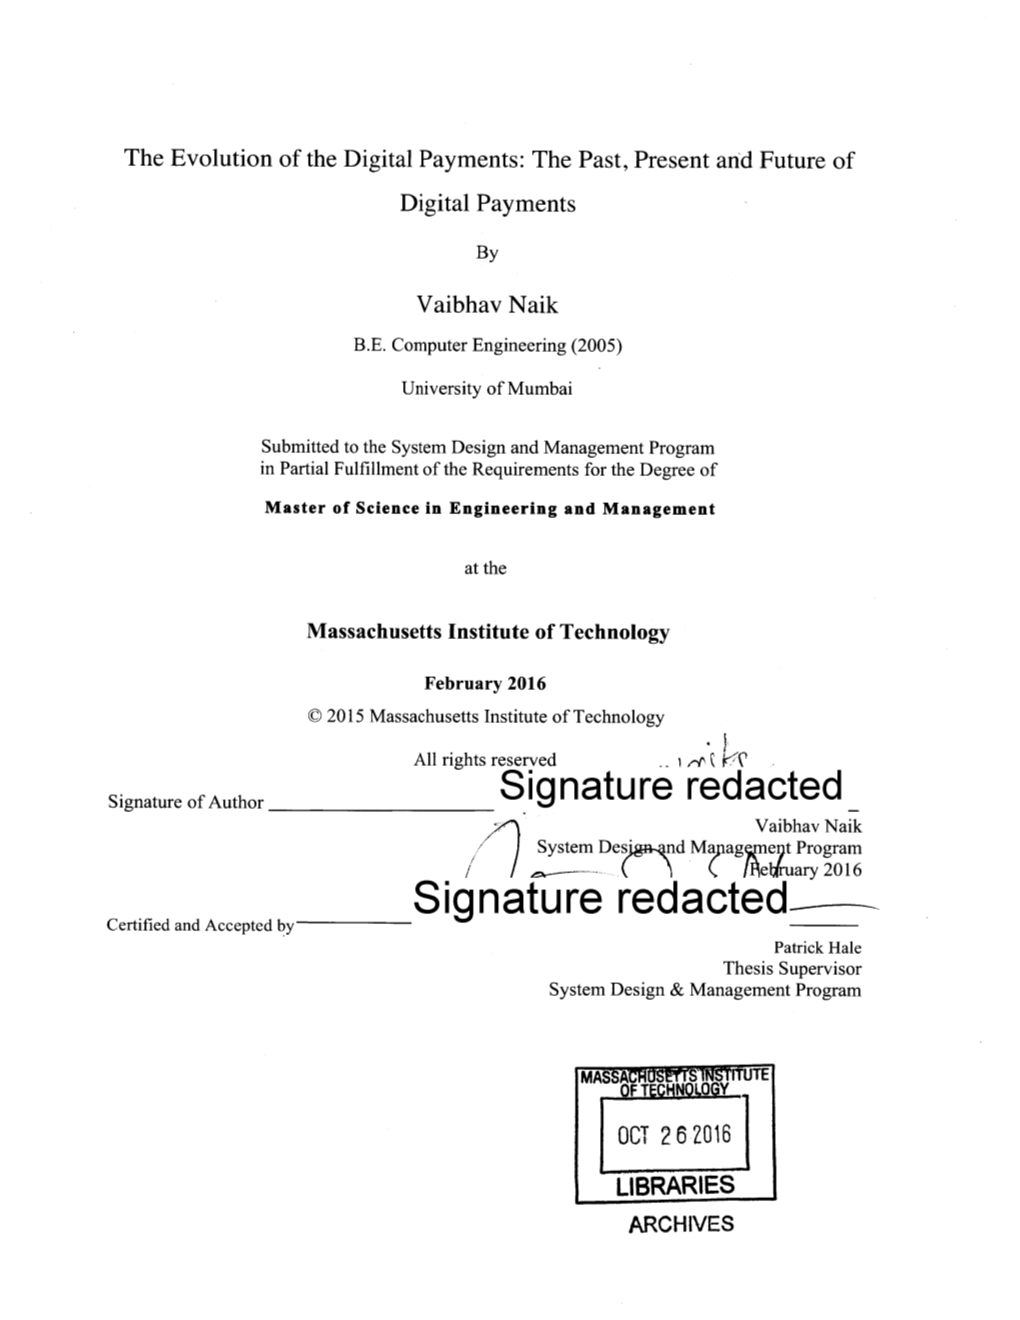 Signature Red Acted___------Certified and Accepted by Patrick Hale Thesis Supervisor System Design & Management Program